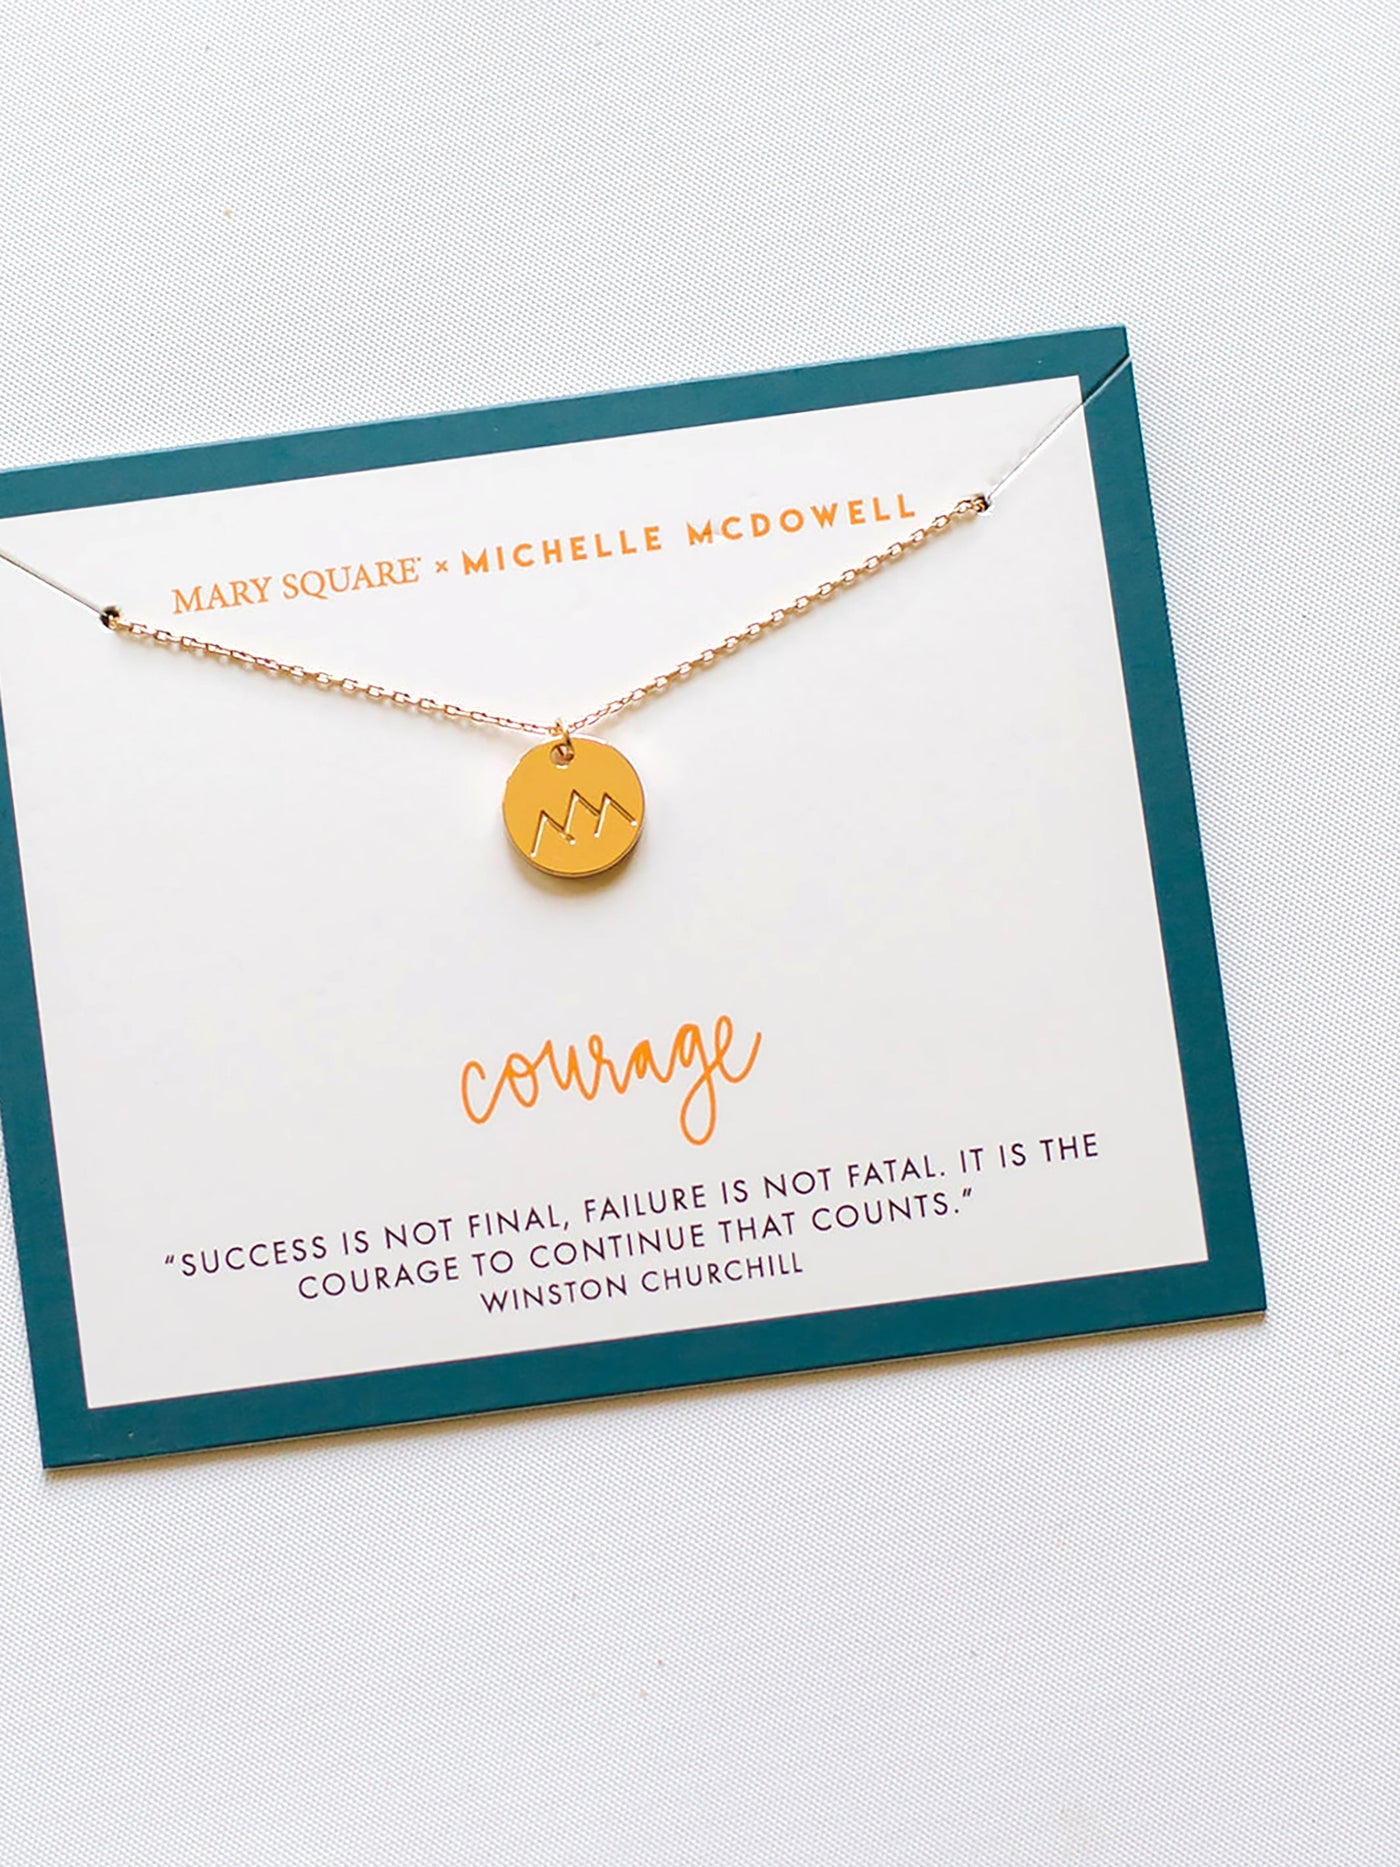 Courage Inspirational Necklace - Mary Square, LLC